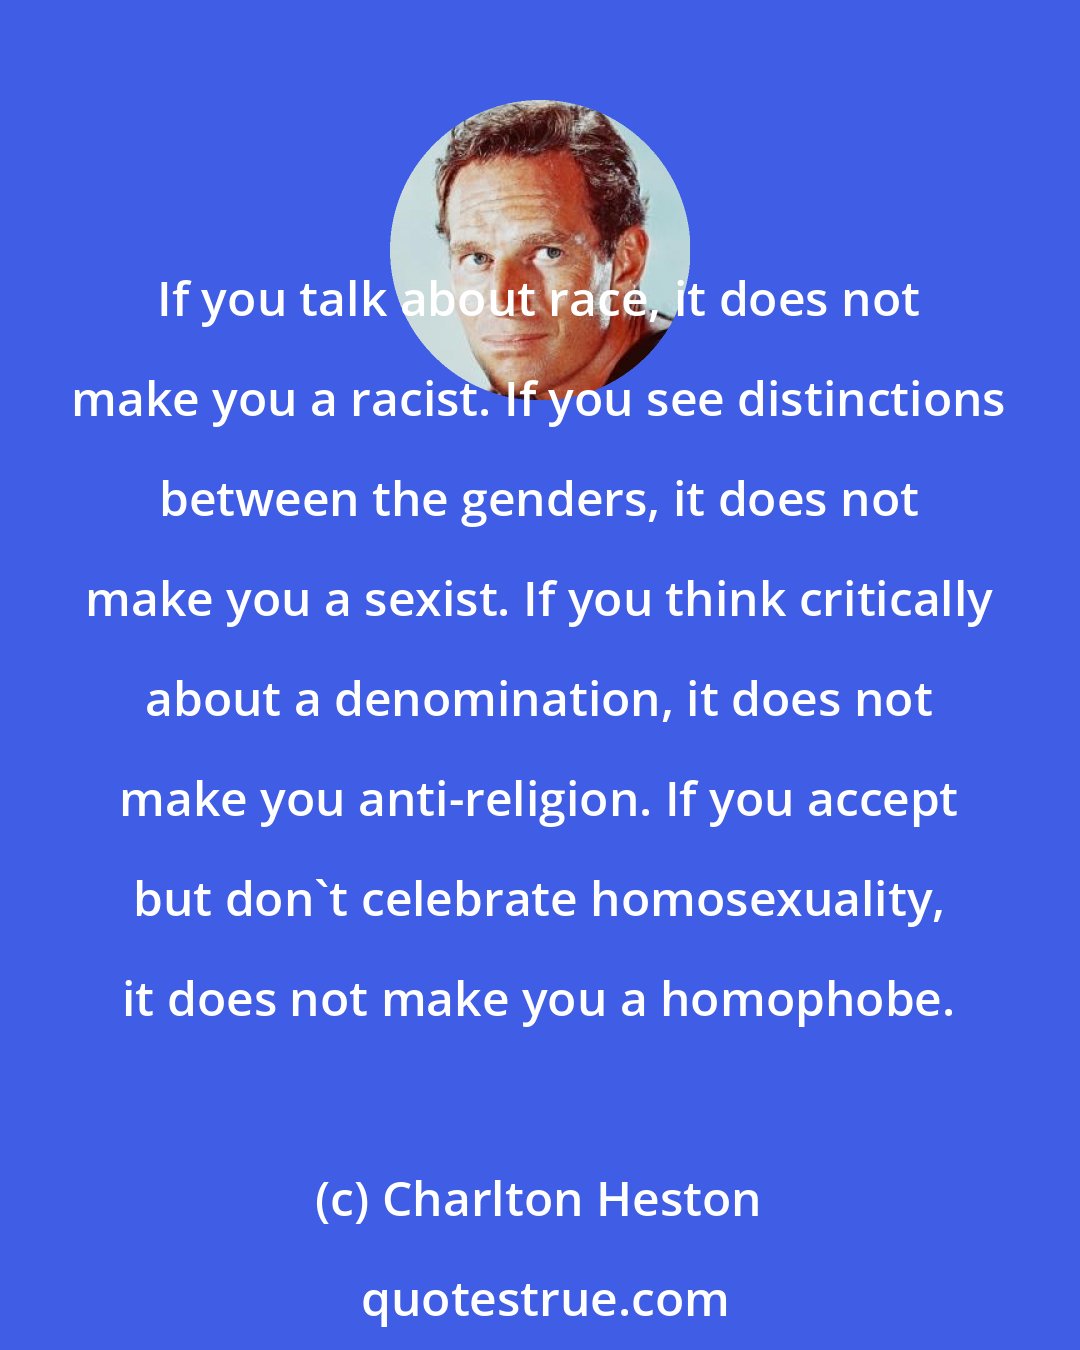 Charlton Heston: If you talk about race, it does not make you a racist. If you see distinctions between the genders, it does not make you a sexist. If you think critically about a denomination, it does not make you anti-religion. If you accept but don't celebrate homosexuality, it does not make you a homophobe.